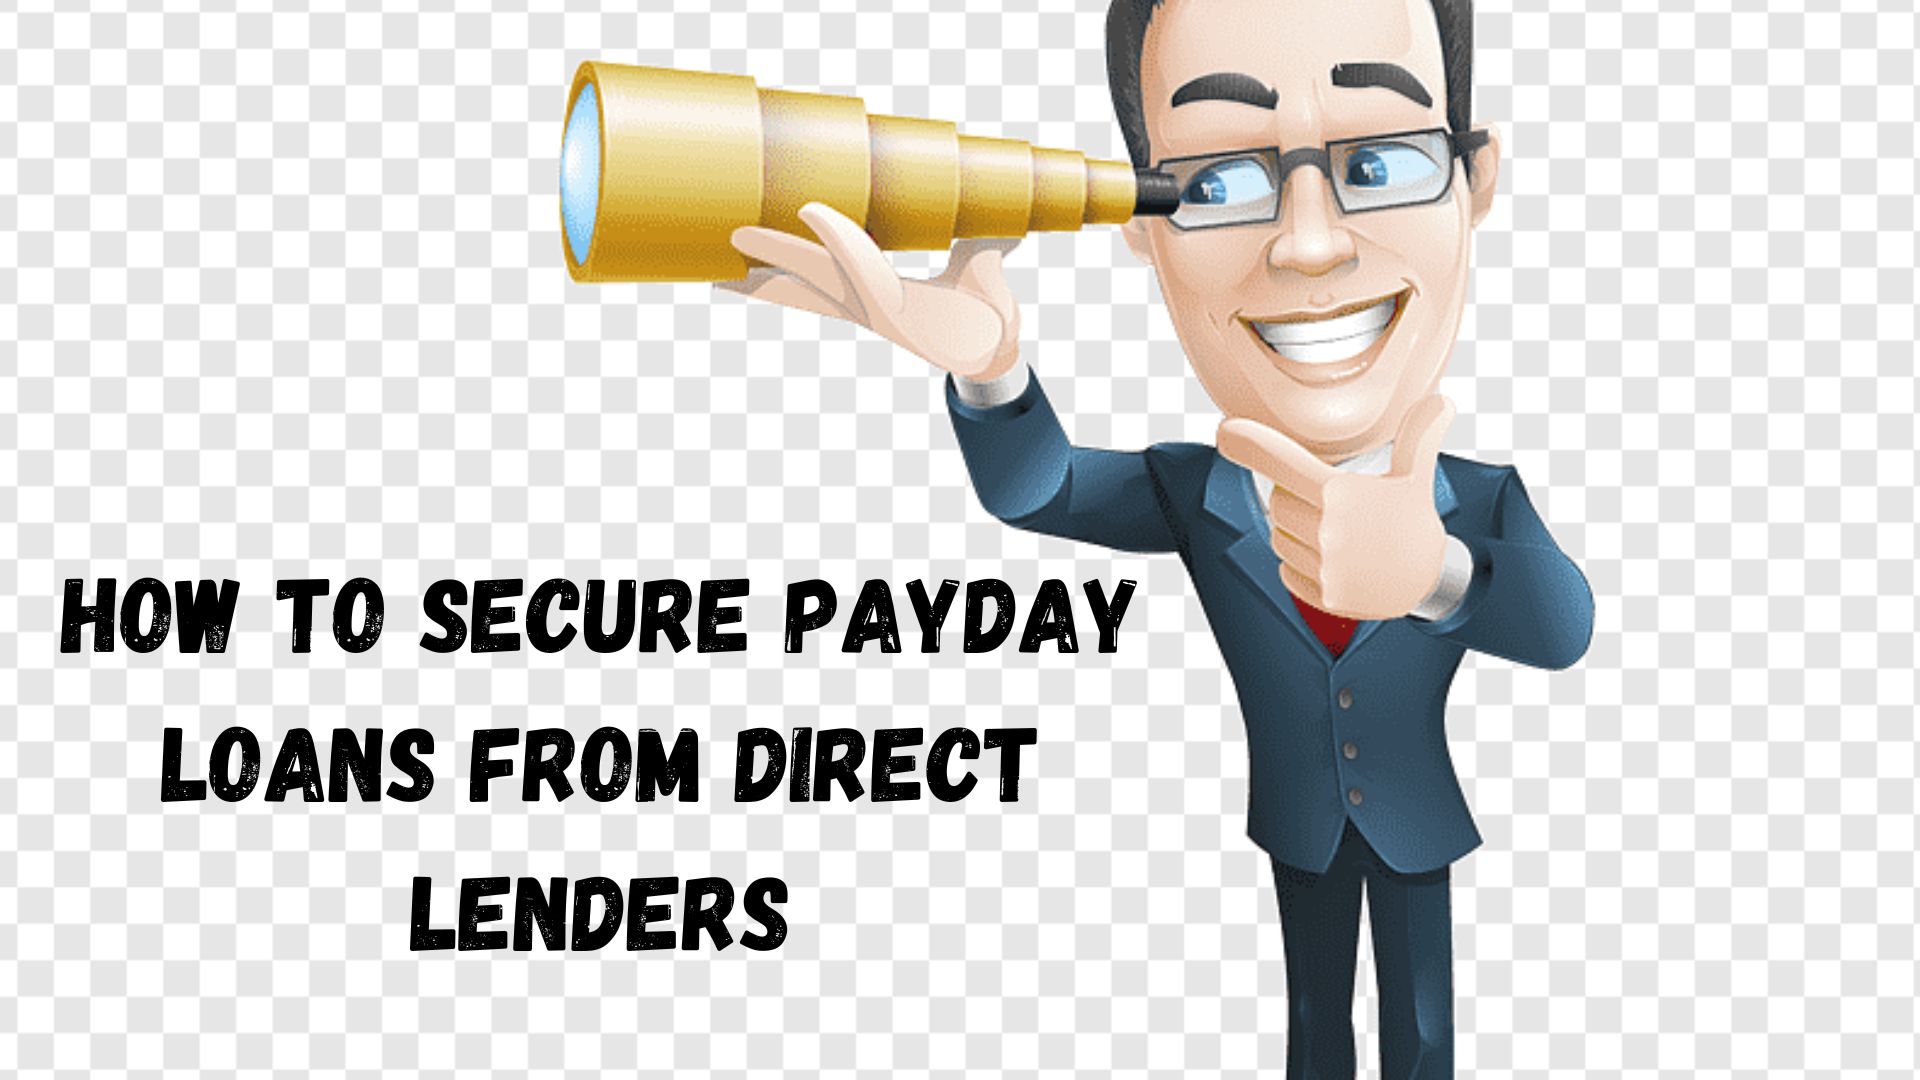 How to Secure Payday Loans Direct Lenders.